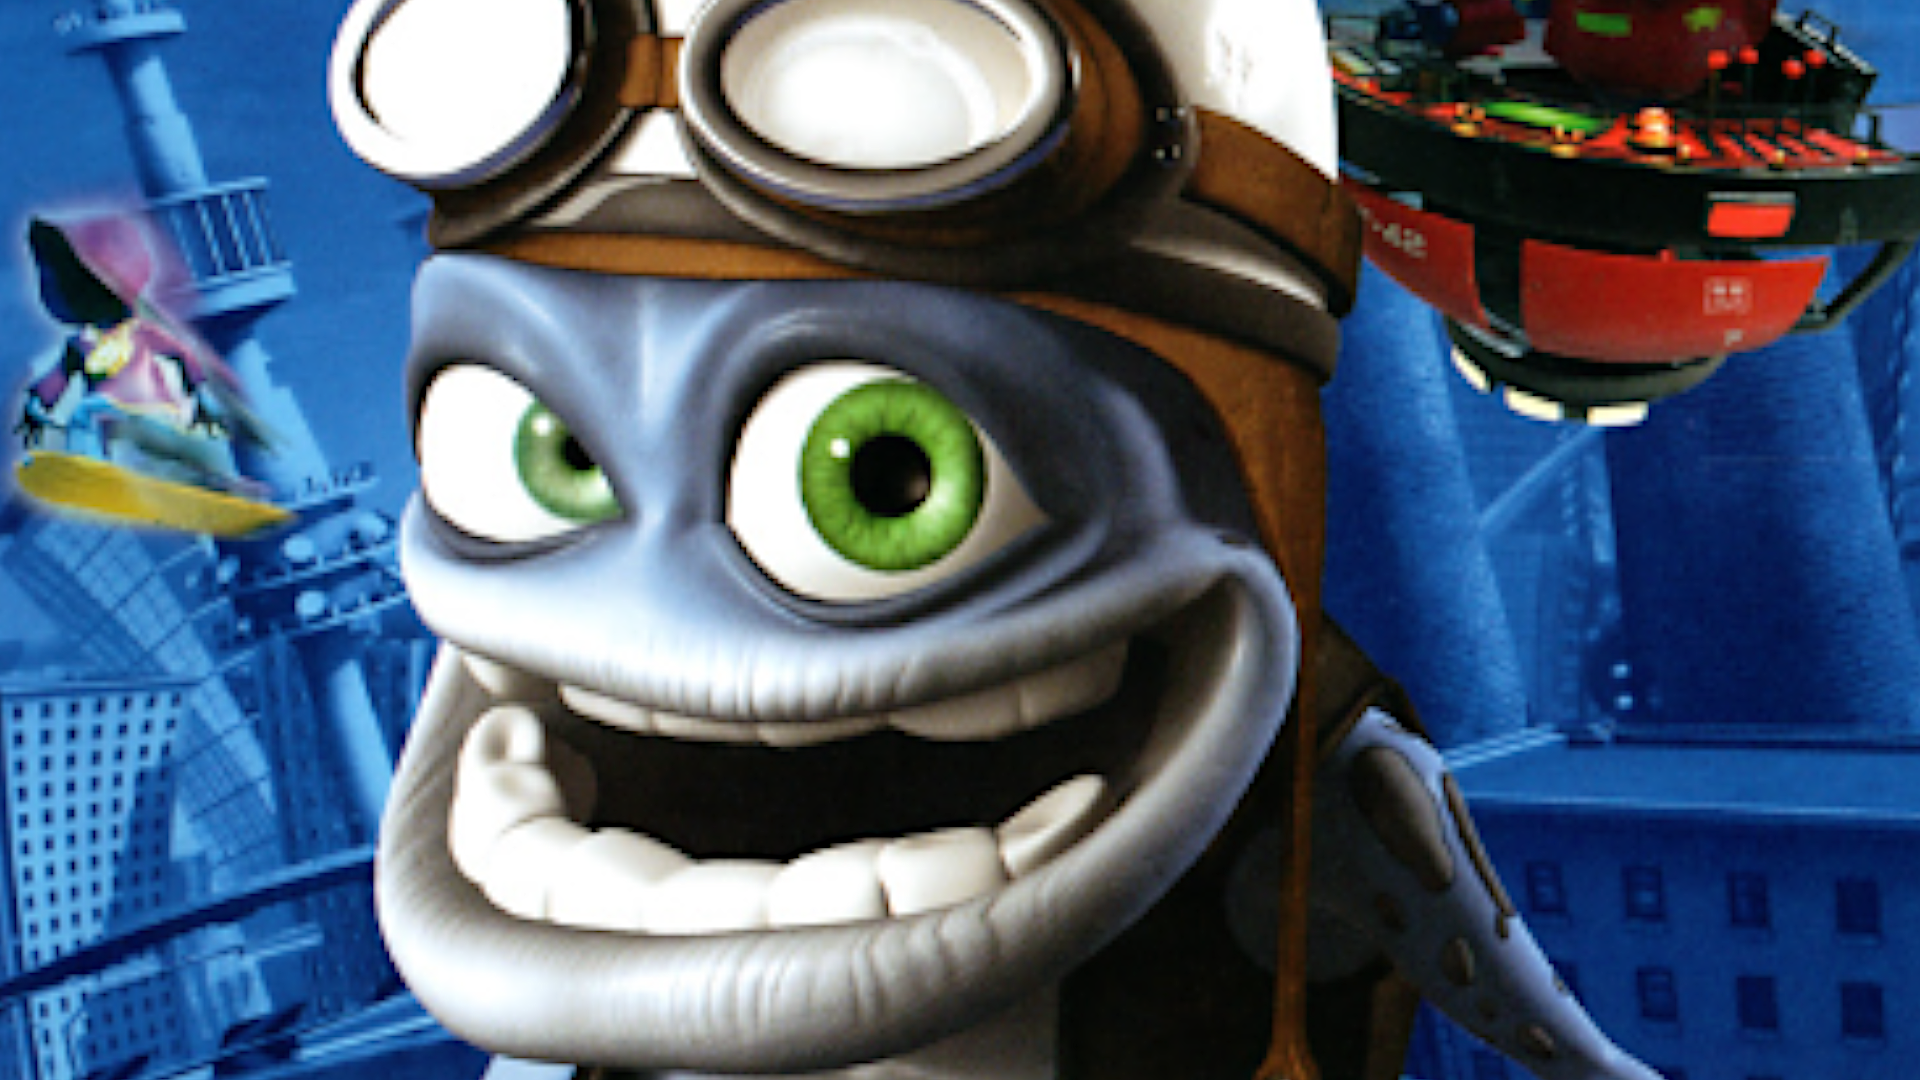 An image of Crazy Frog used for Crazy Frog Racer on the PS2, his wide, open mouth drawn into an unsettling grimace.